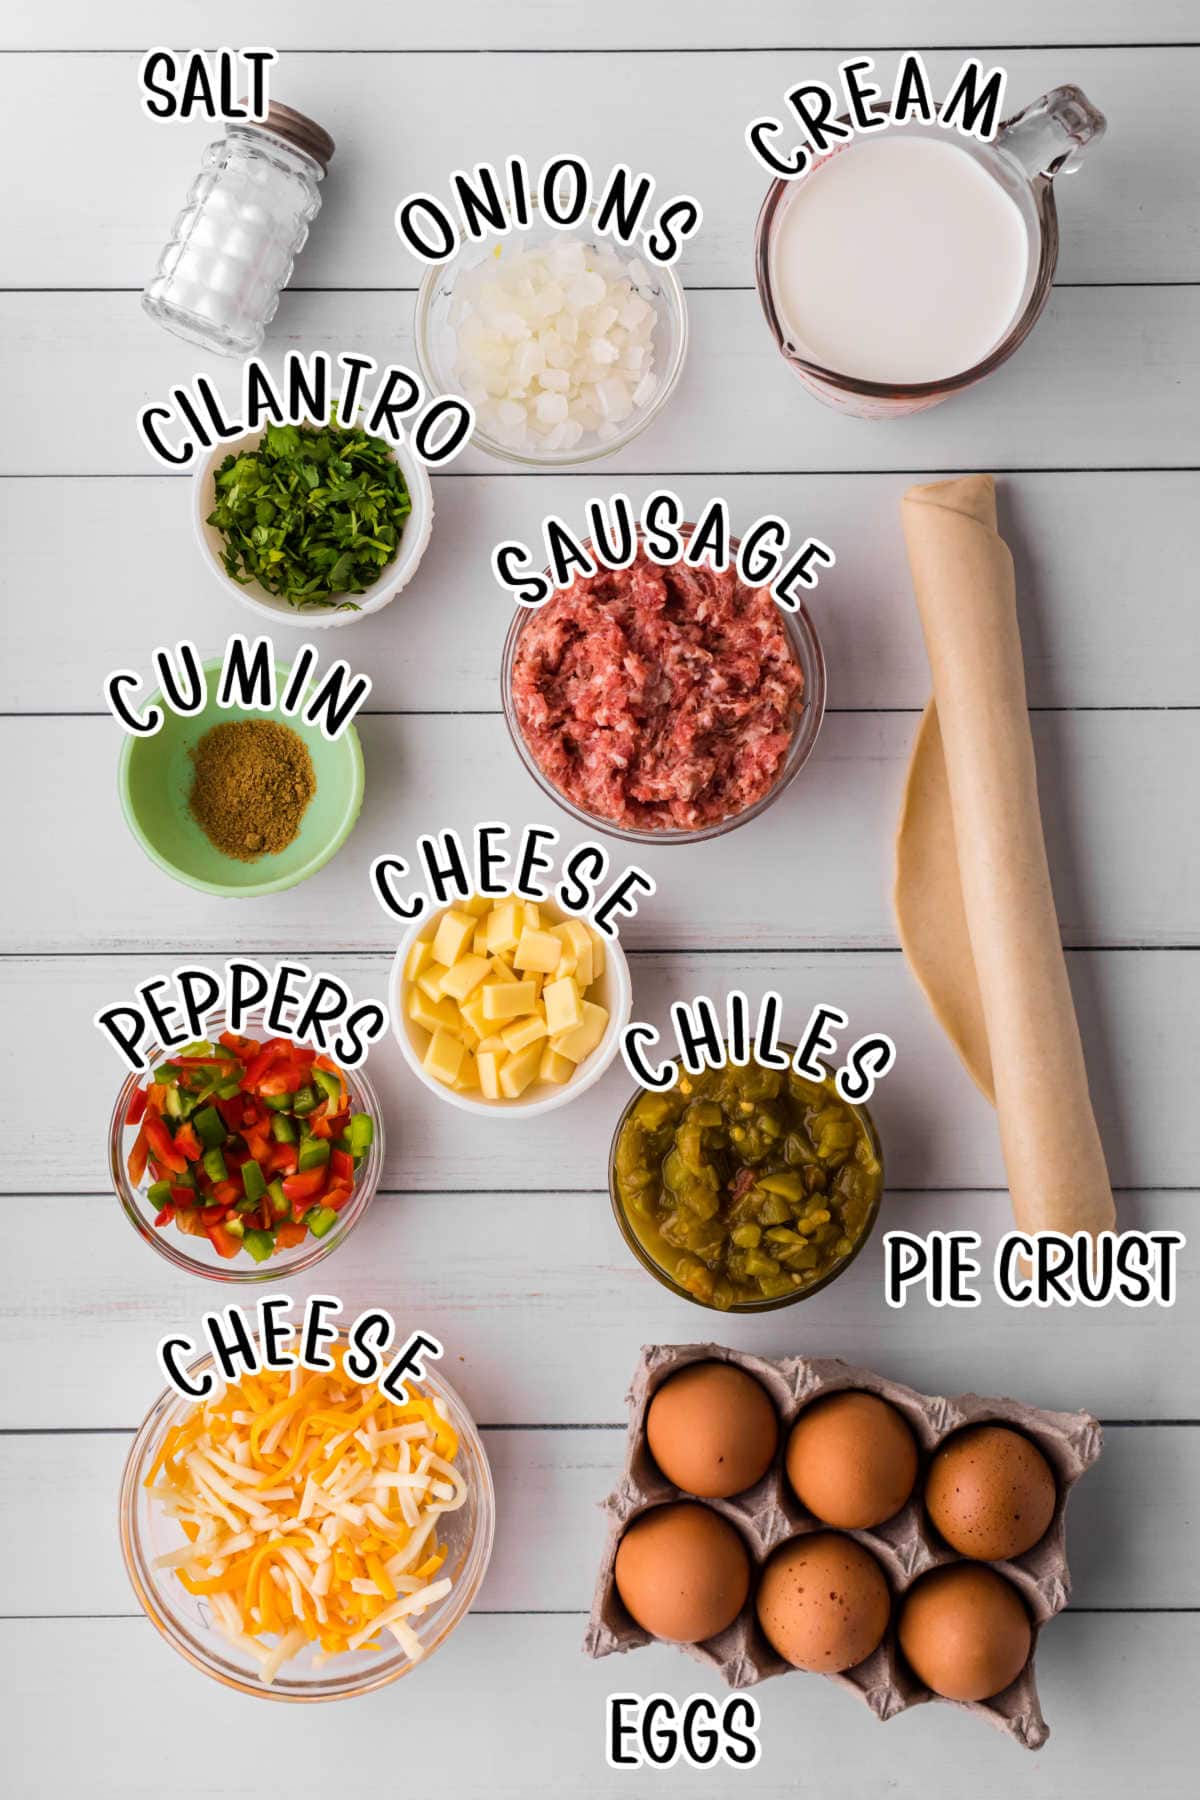 Labeled ingredients for this quiche recipe.